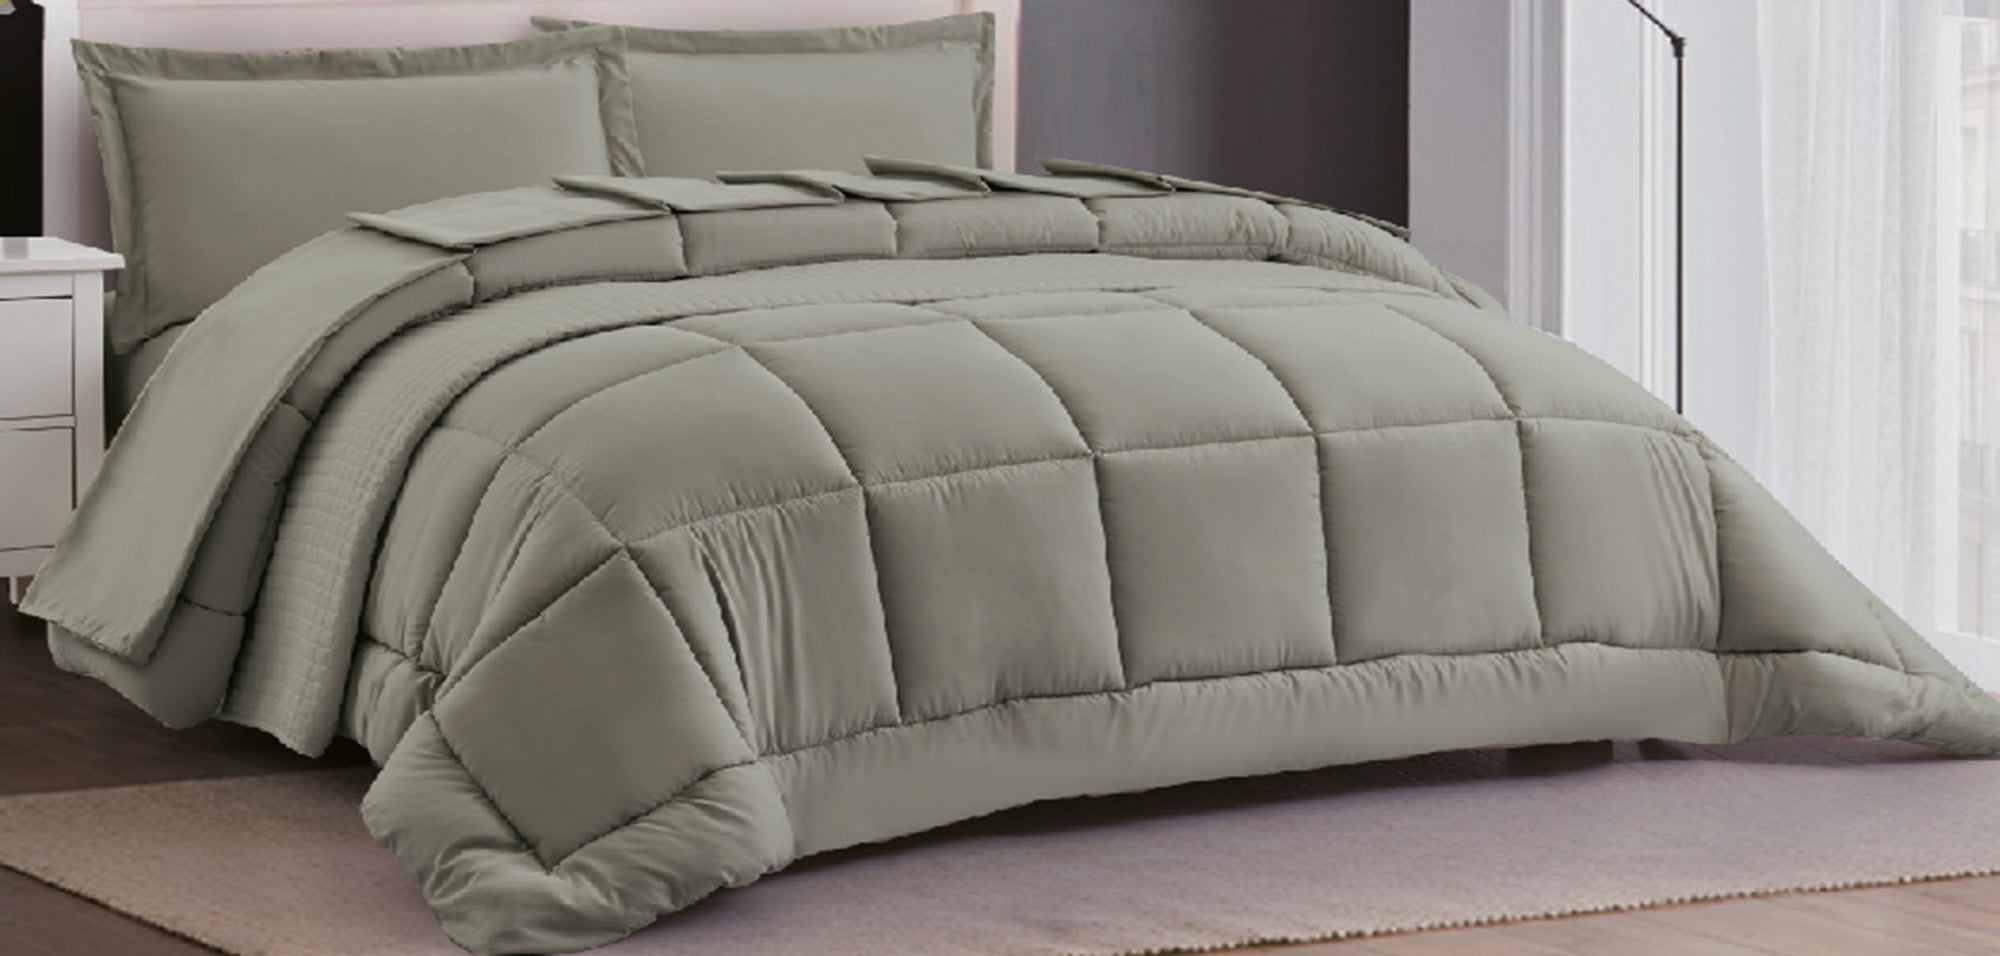 Florenzia quilt in green color